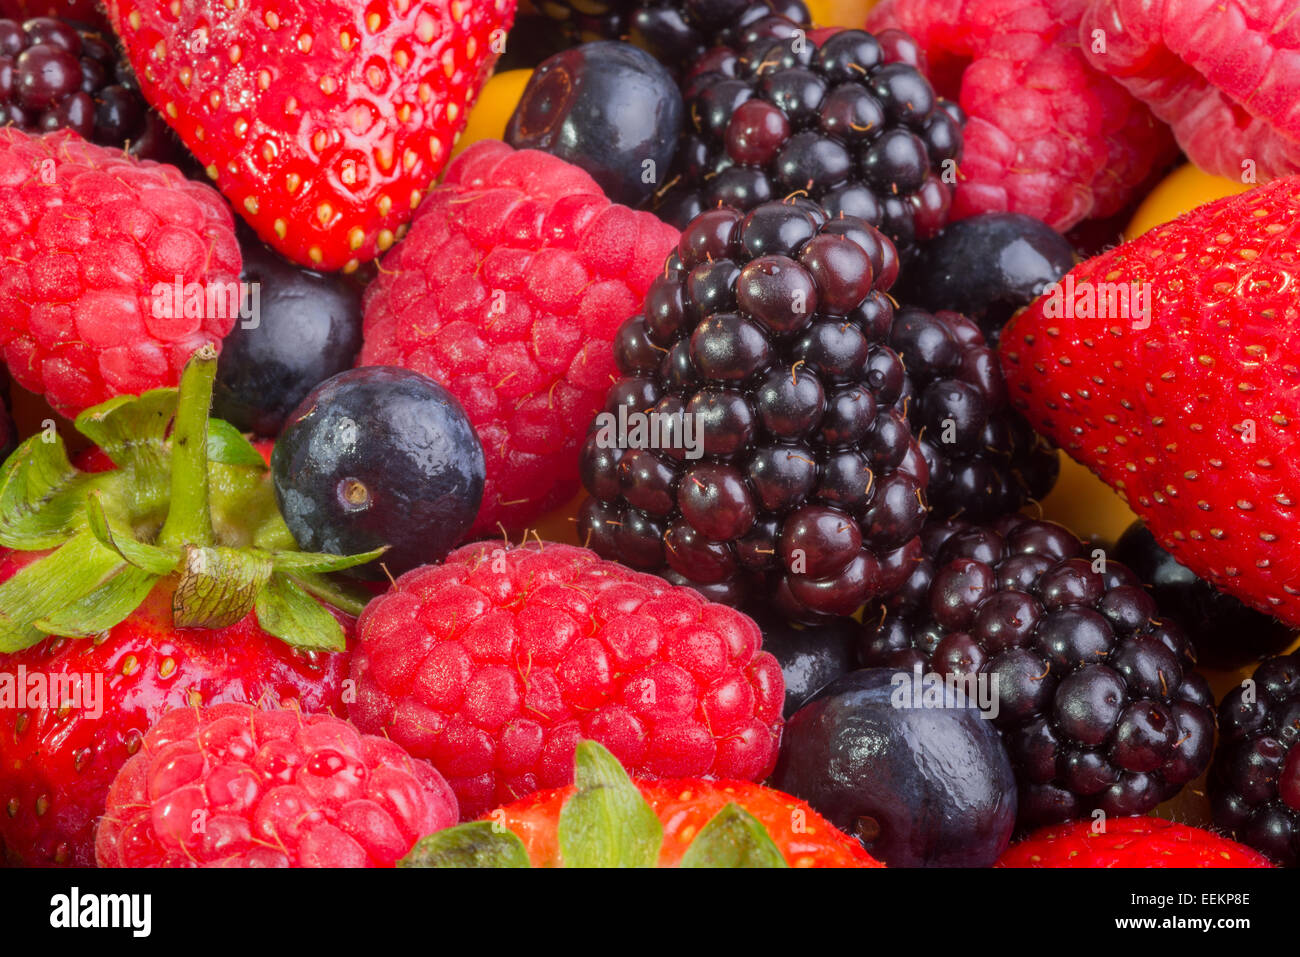 Up Close view of fresh berries of different types, all mixed together. Stock Photo